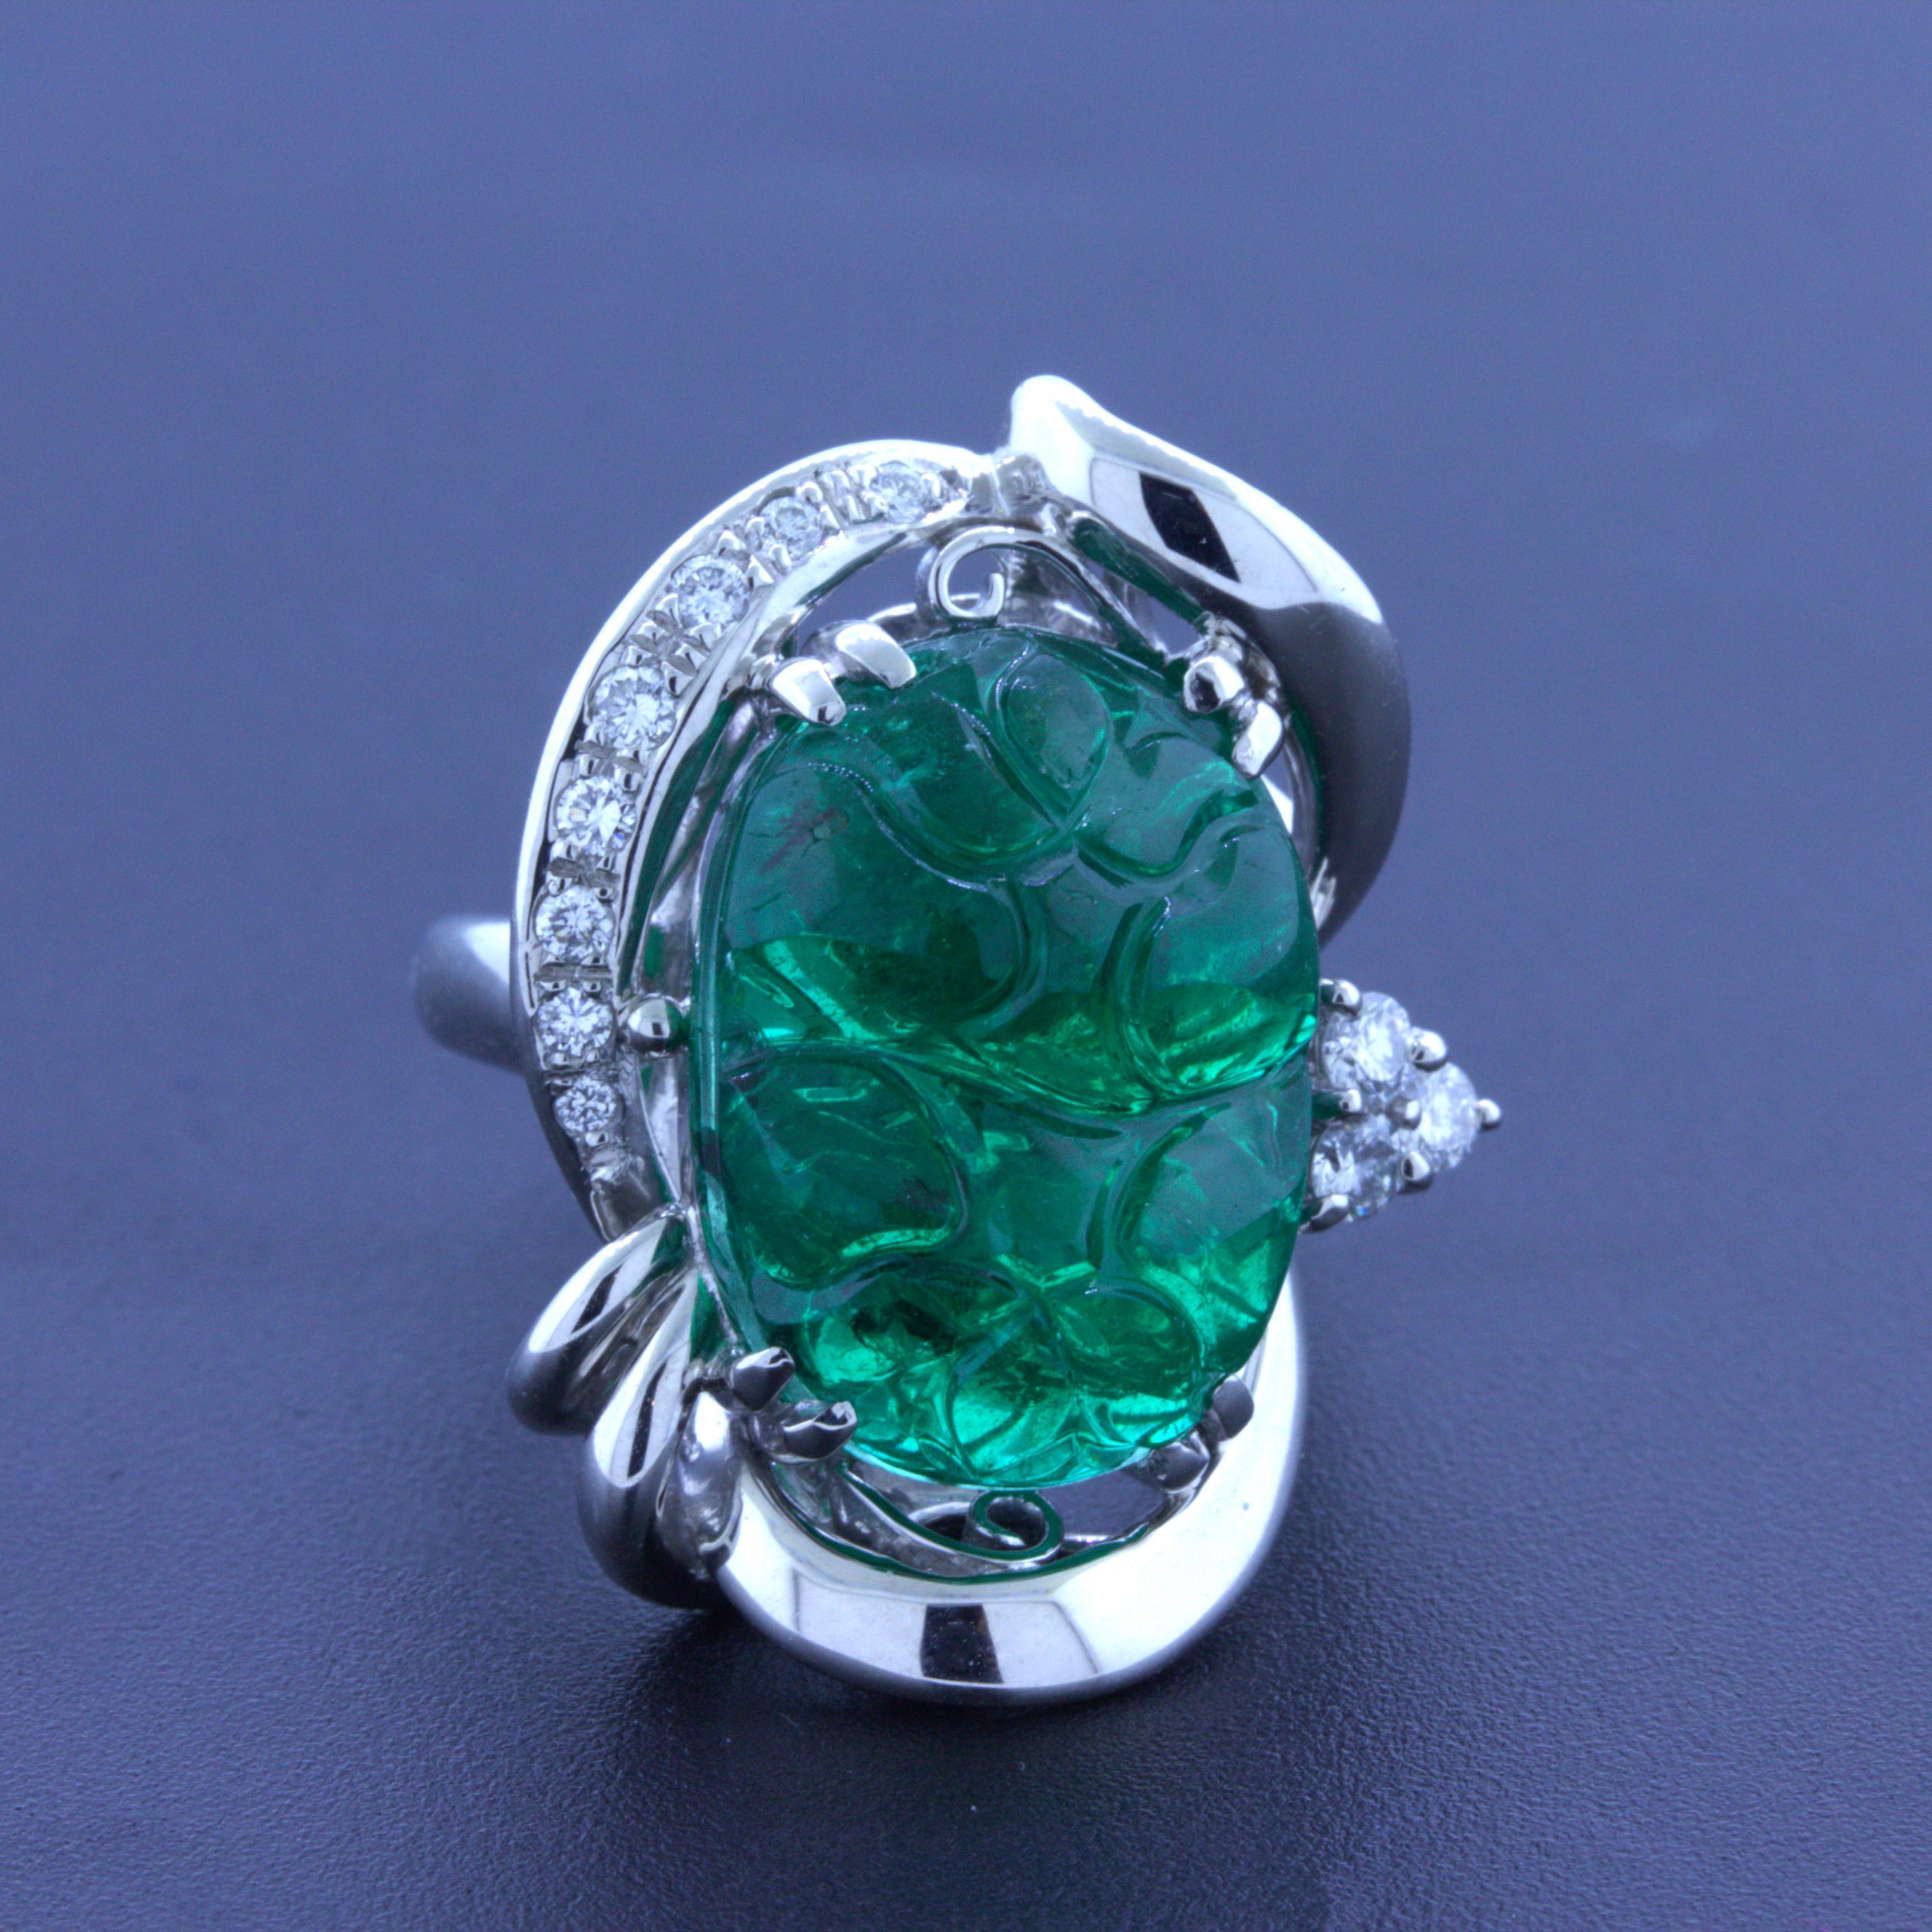 A chic and elegant platinum ring featuring a fine natural carved emerald. It weighs an impressive 10.23 carats and has a very rich, yet still bright, vivid grass green color. It has been hand-carved with floral motifs making it stand out. It is